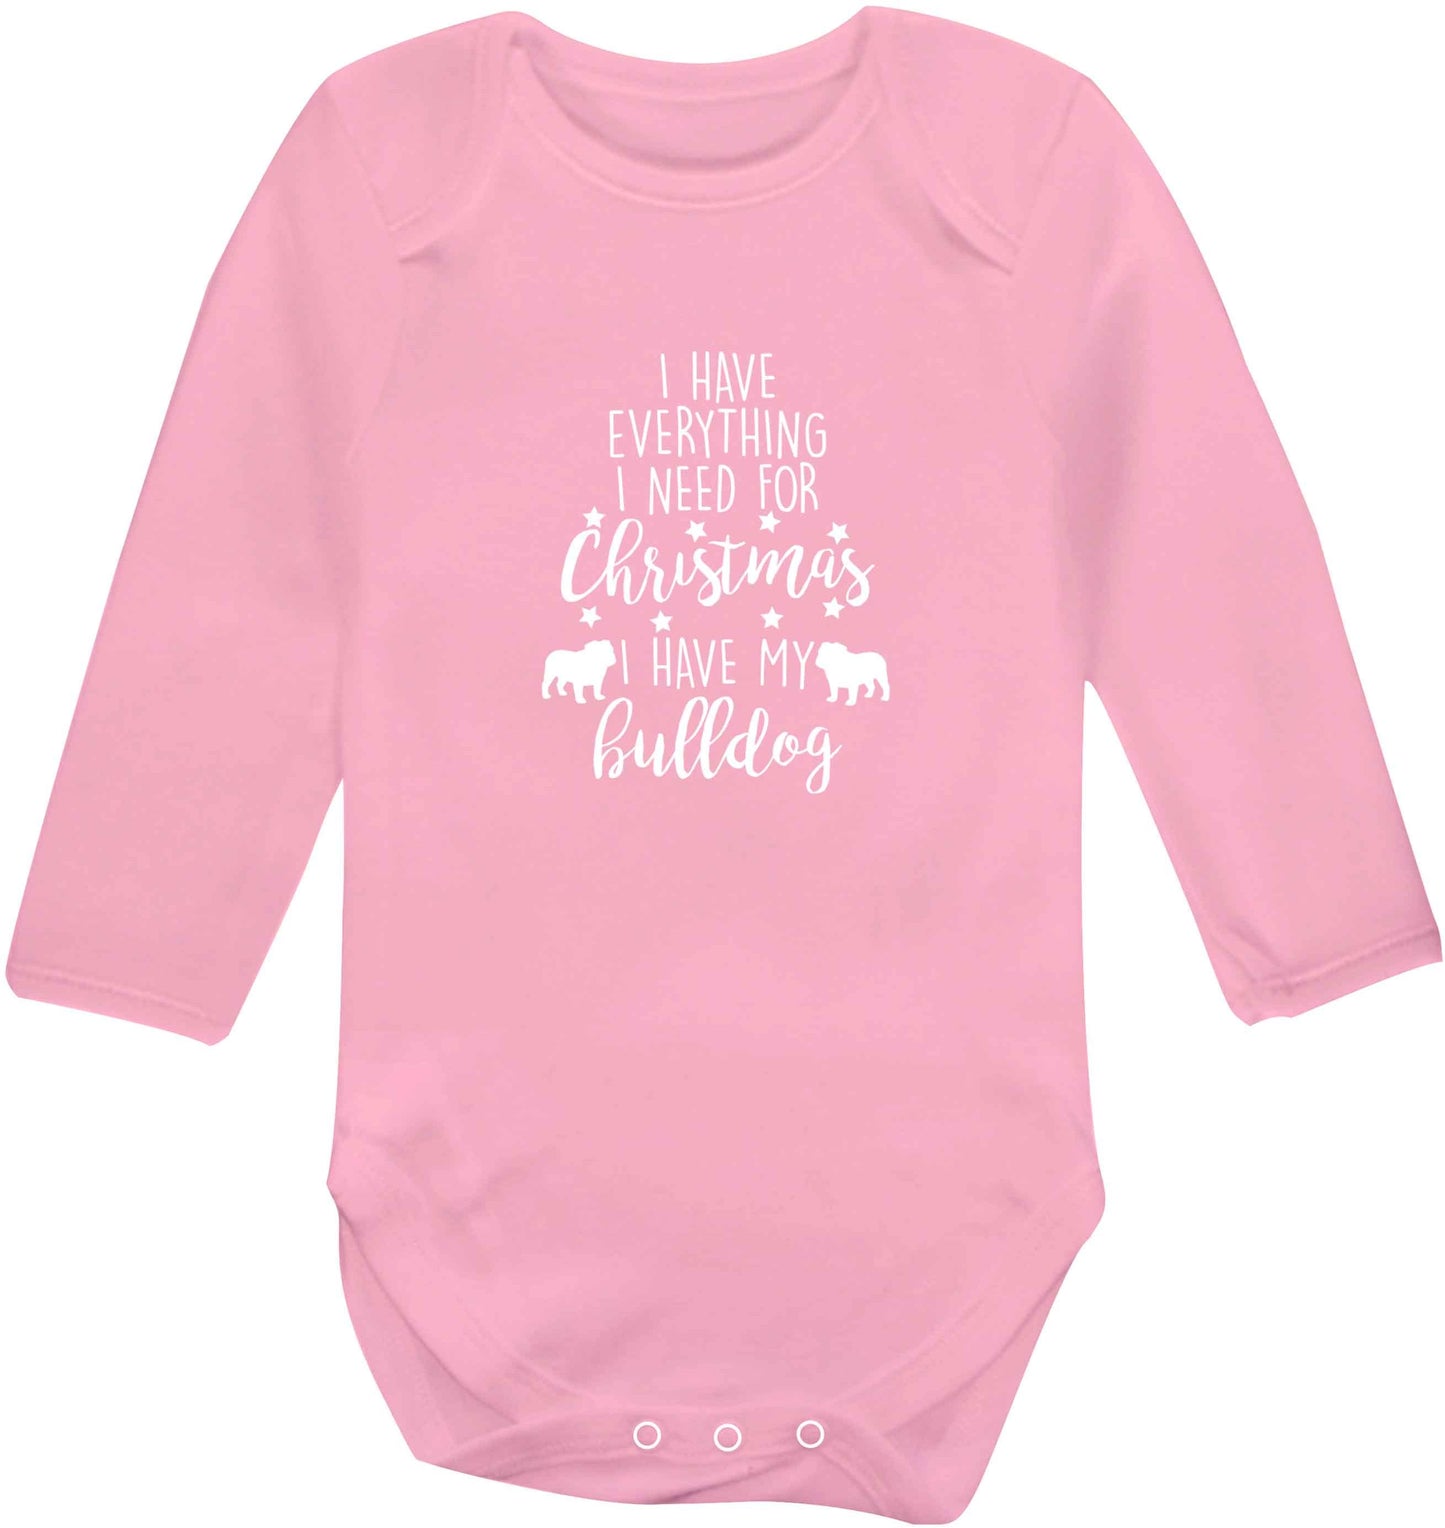 I have everything I need for Christmas I have my bulldog baby vest long sleeved pale pink 6-12 months